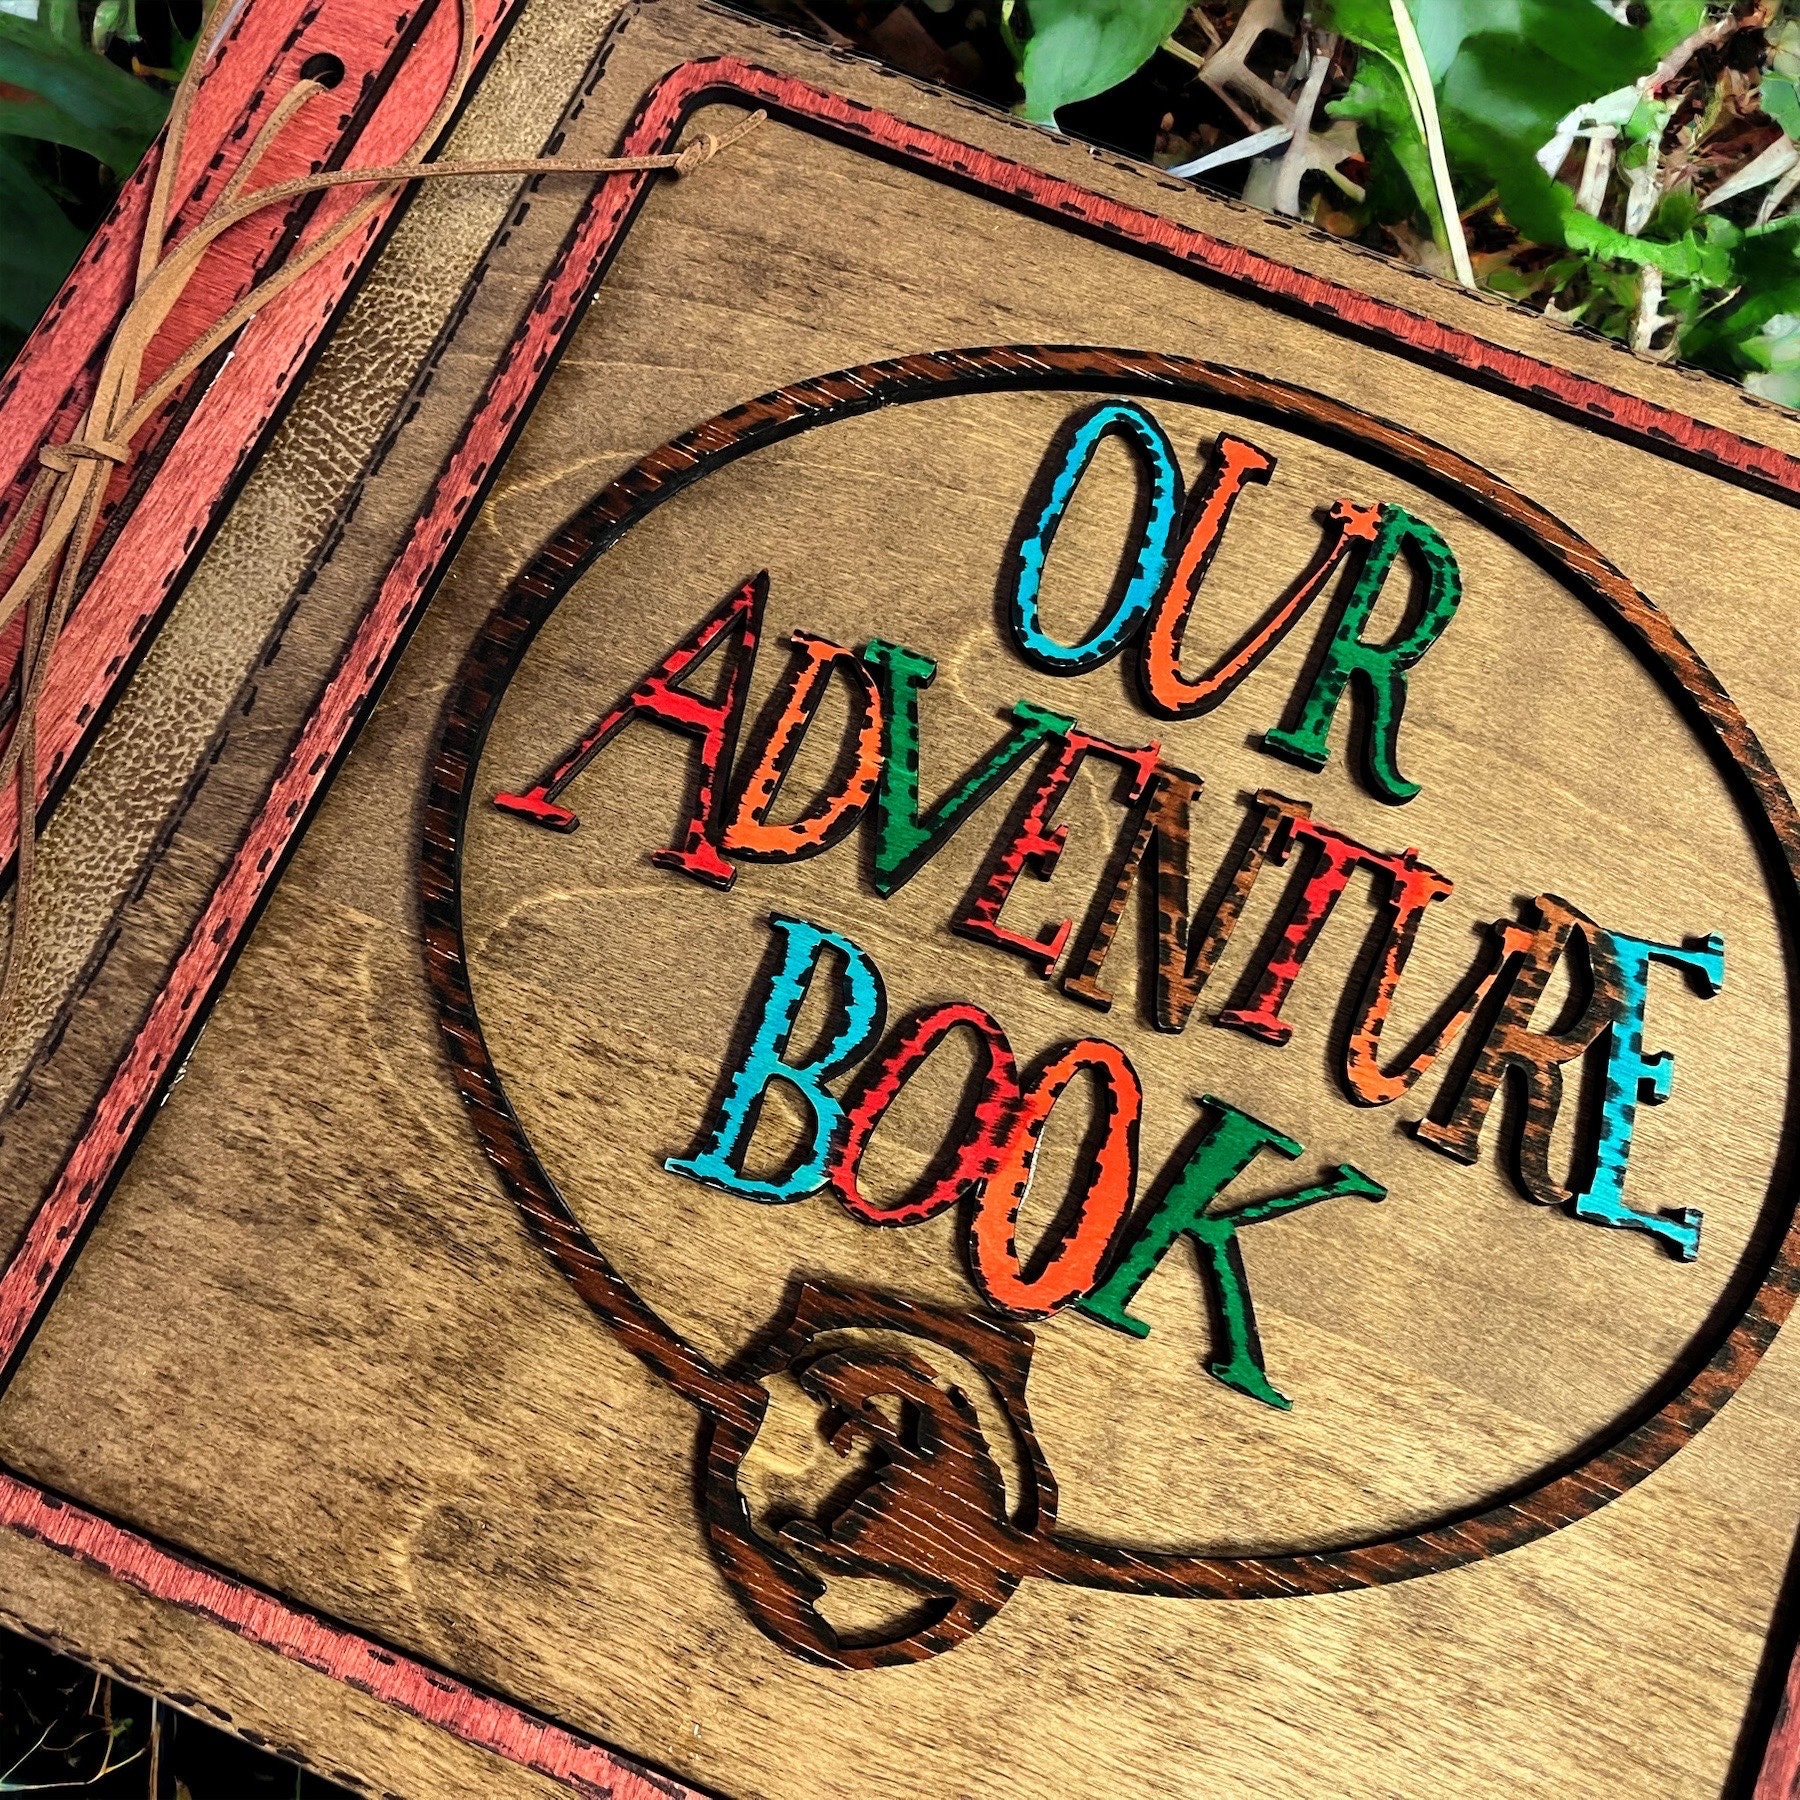 Our Adventure Book Pixar up Themed Personalized, Travel Photo